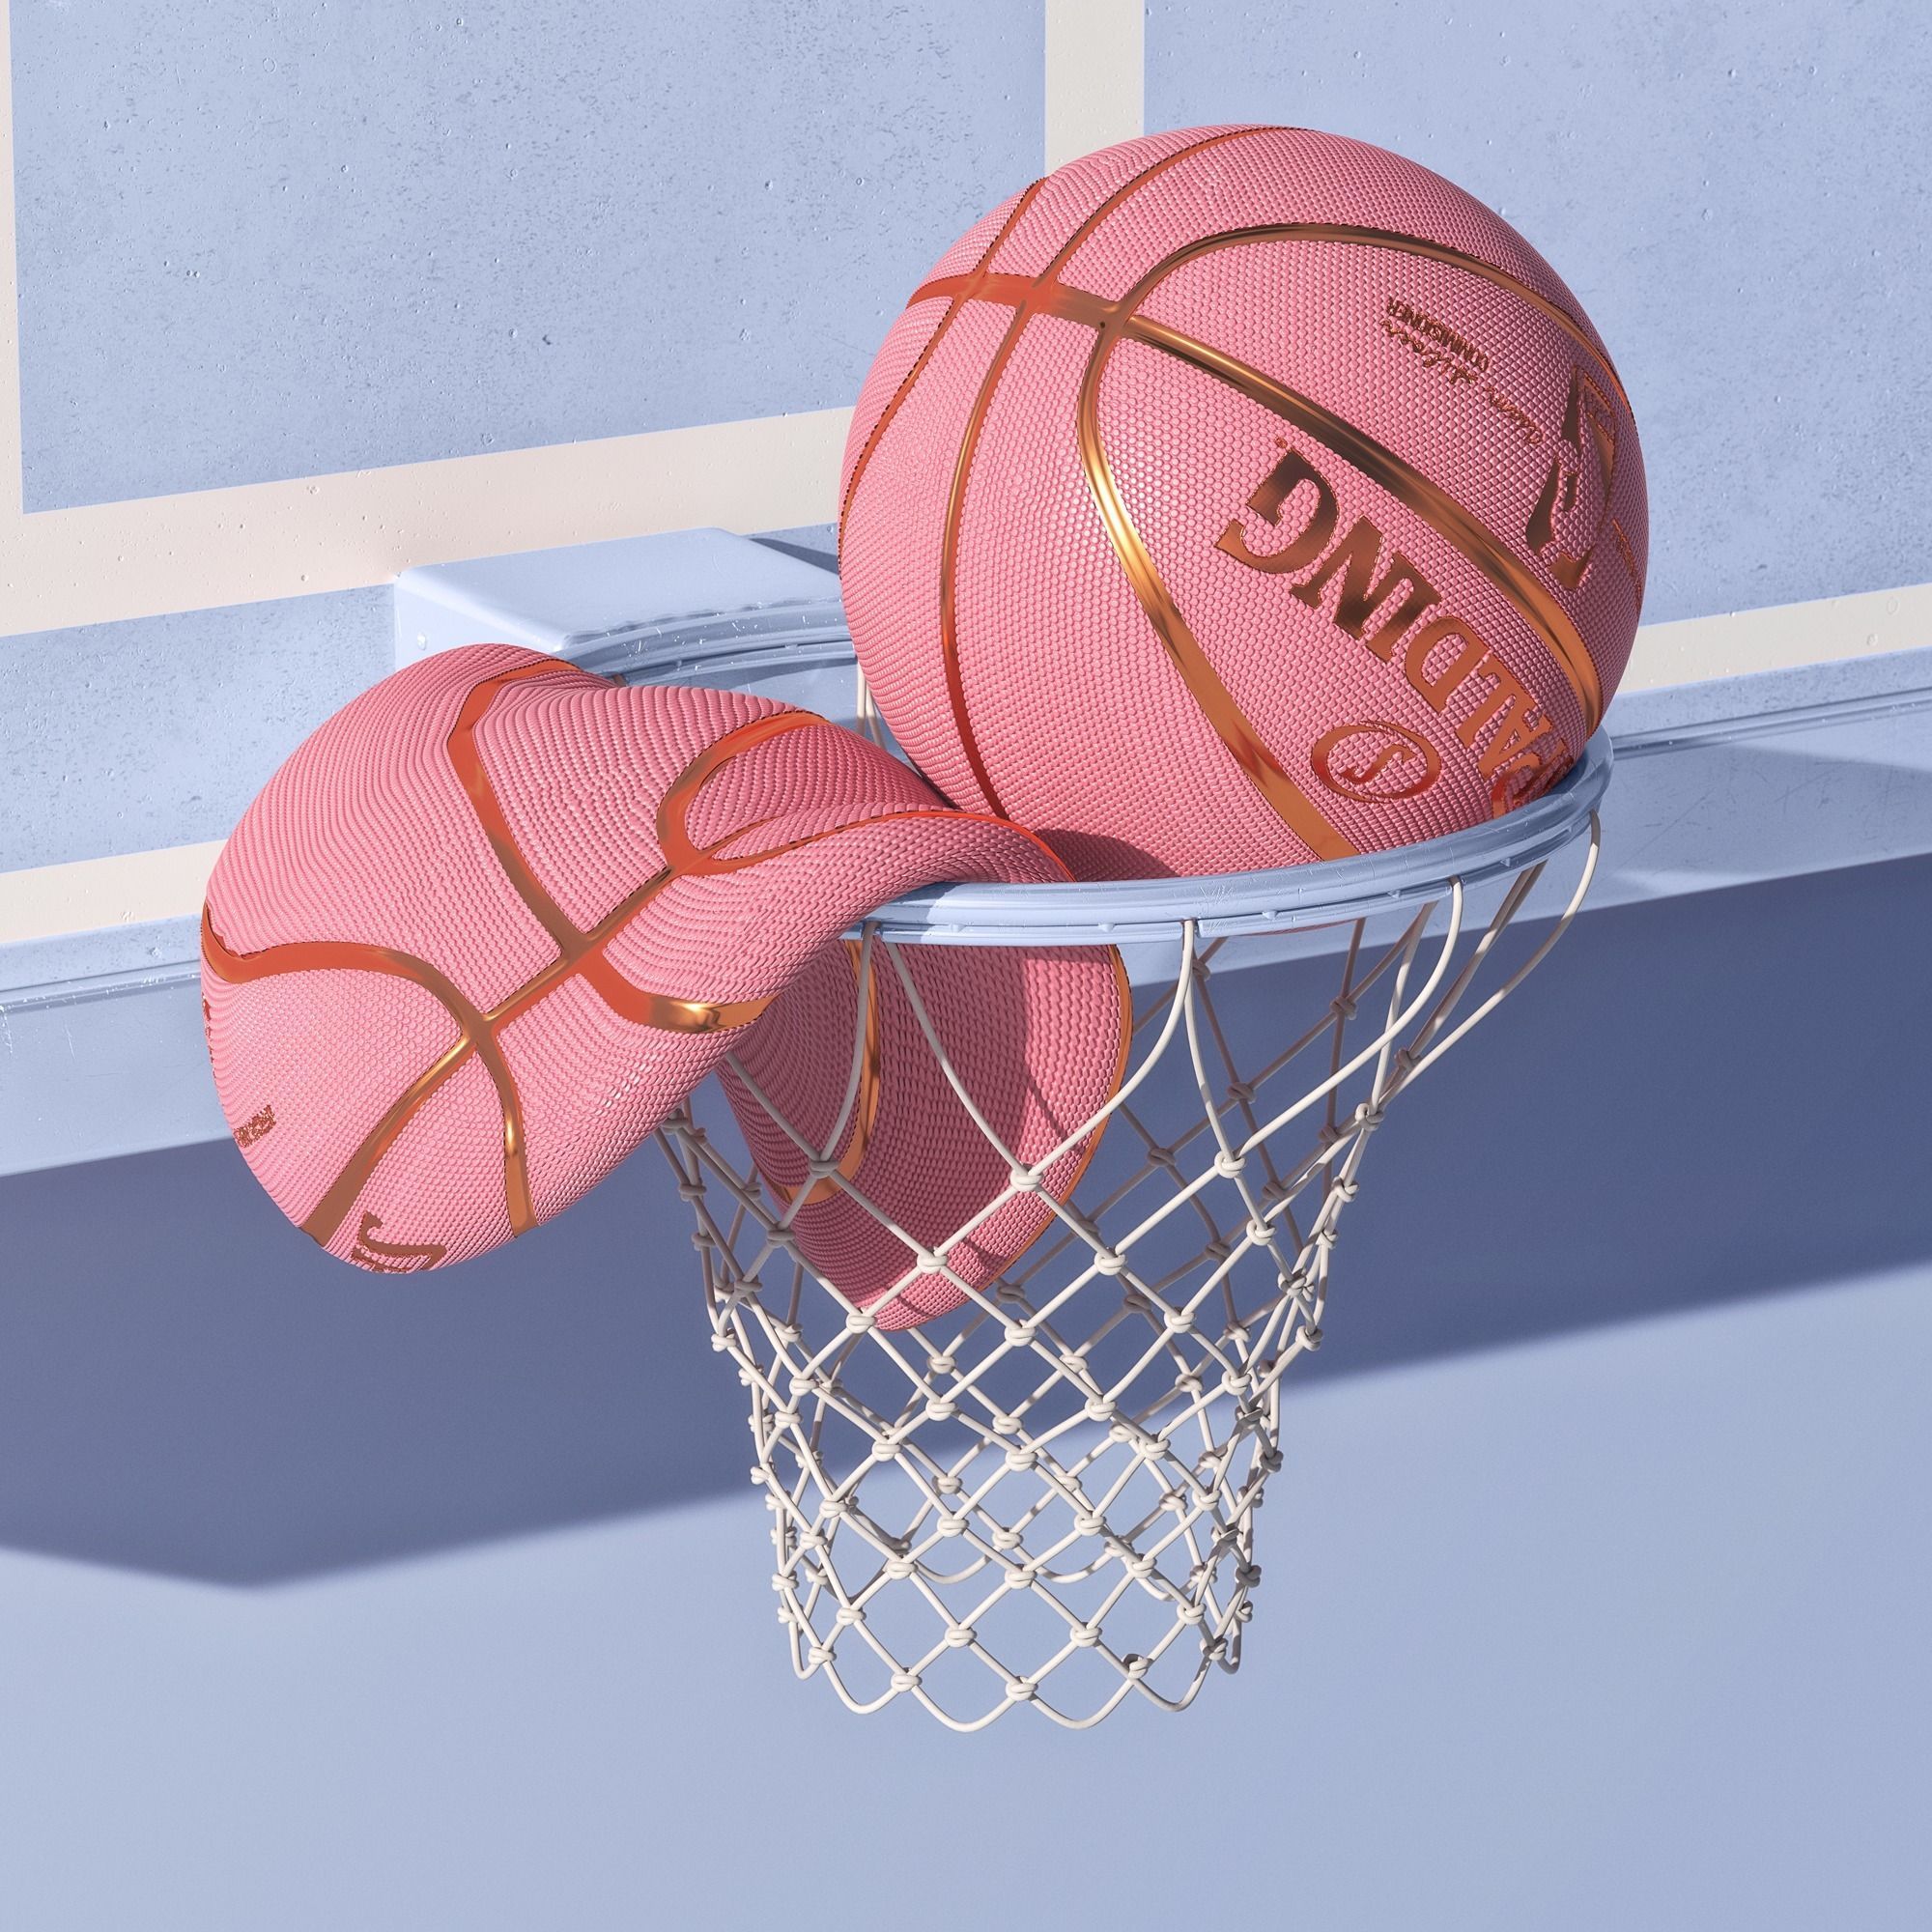 A basketball net with two pink basketballs in it - Basketball